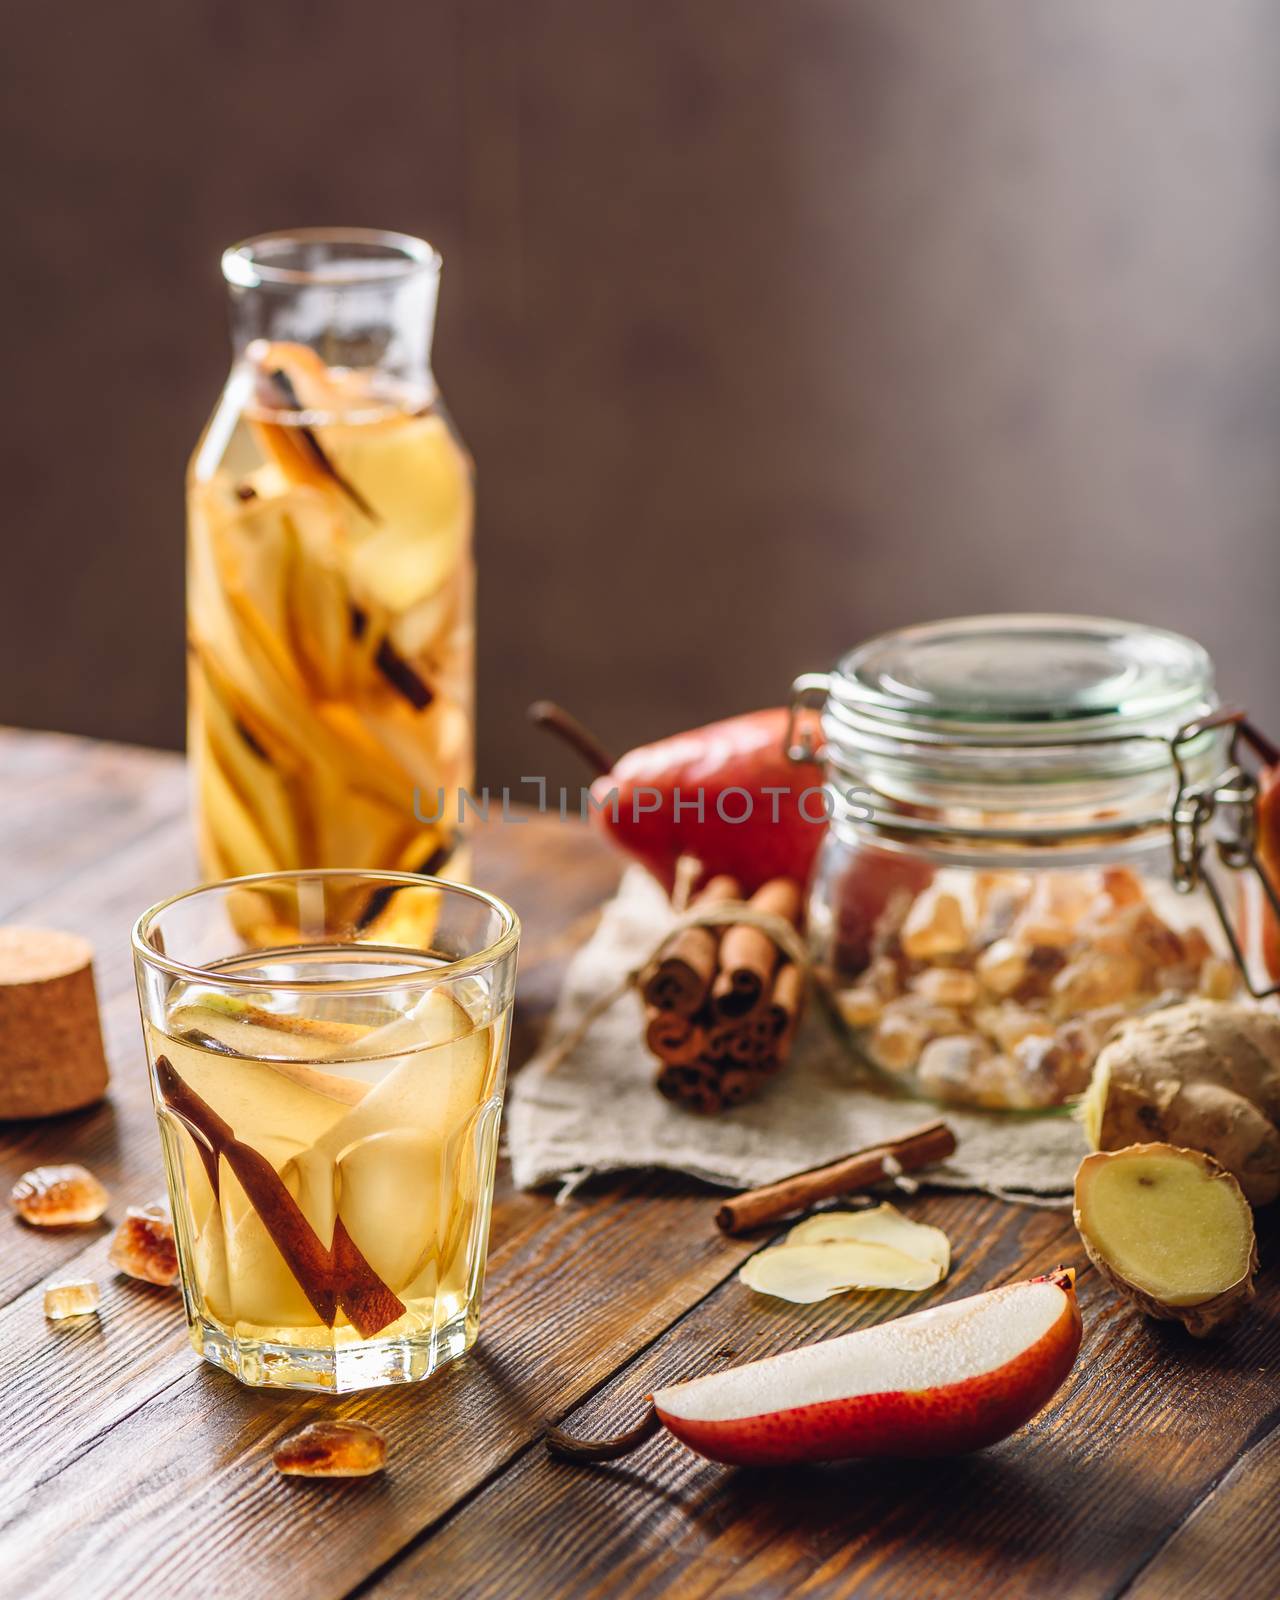 Detox Water Infused with Sliced Pear, Cinnamon Stick, Ginger Root and Some Sugar. Ingredients on Wooden Table. Vertical Orientation.